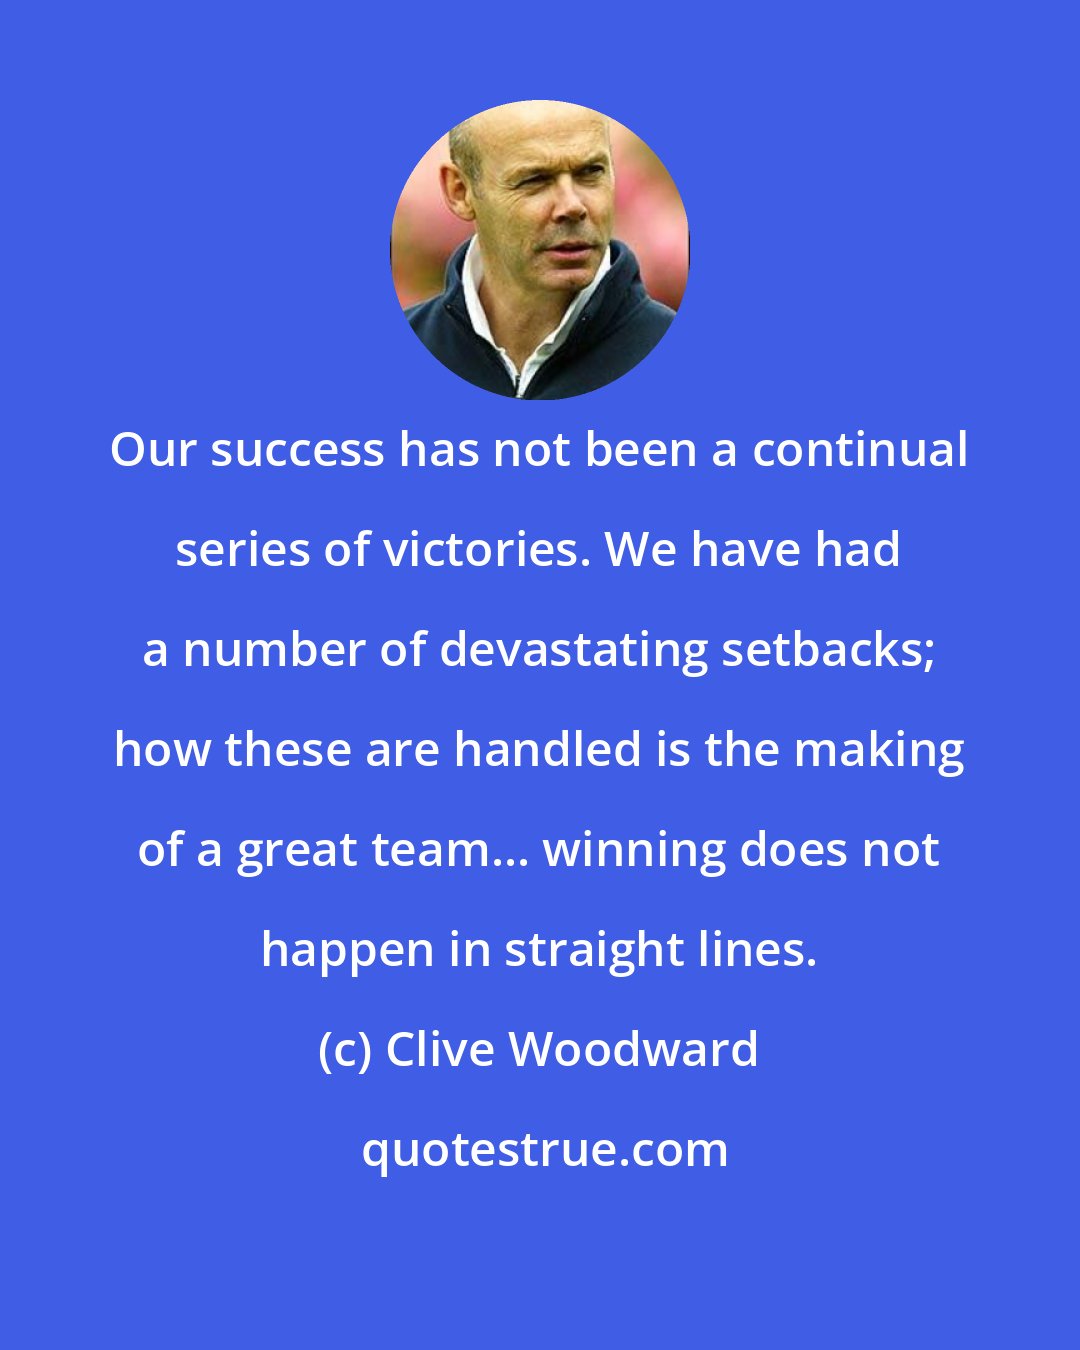 Clive Woodward: Our success has not been a continual series of victories. We have had a number of devastating setbacks; how these are handled is the making of a great team... winning does not happen in straight lines.